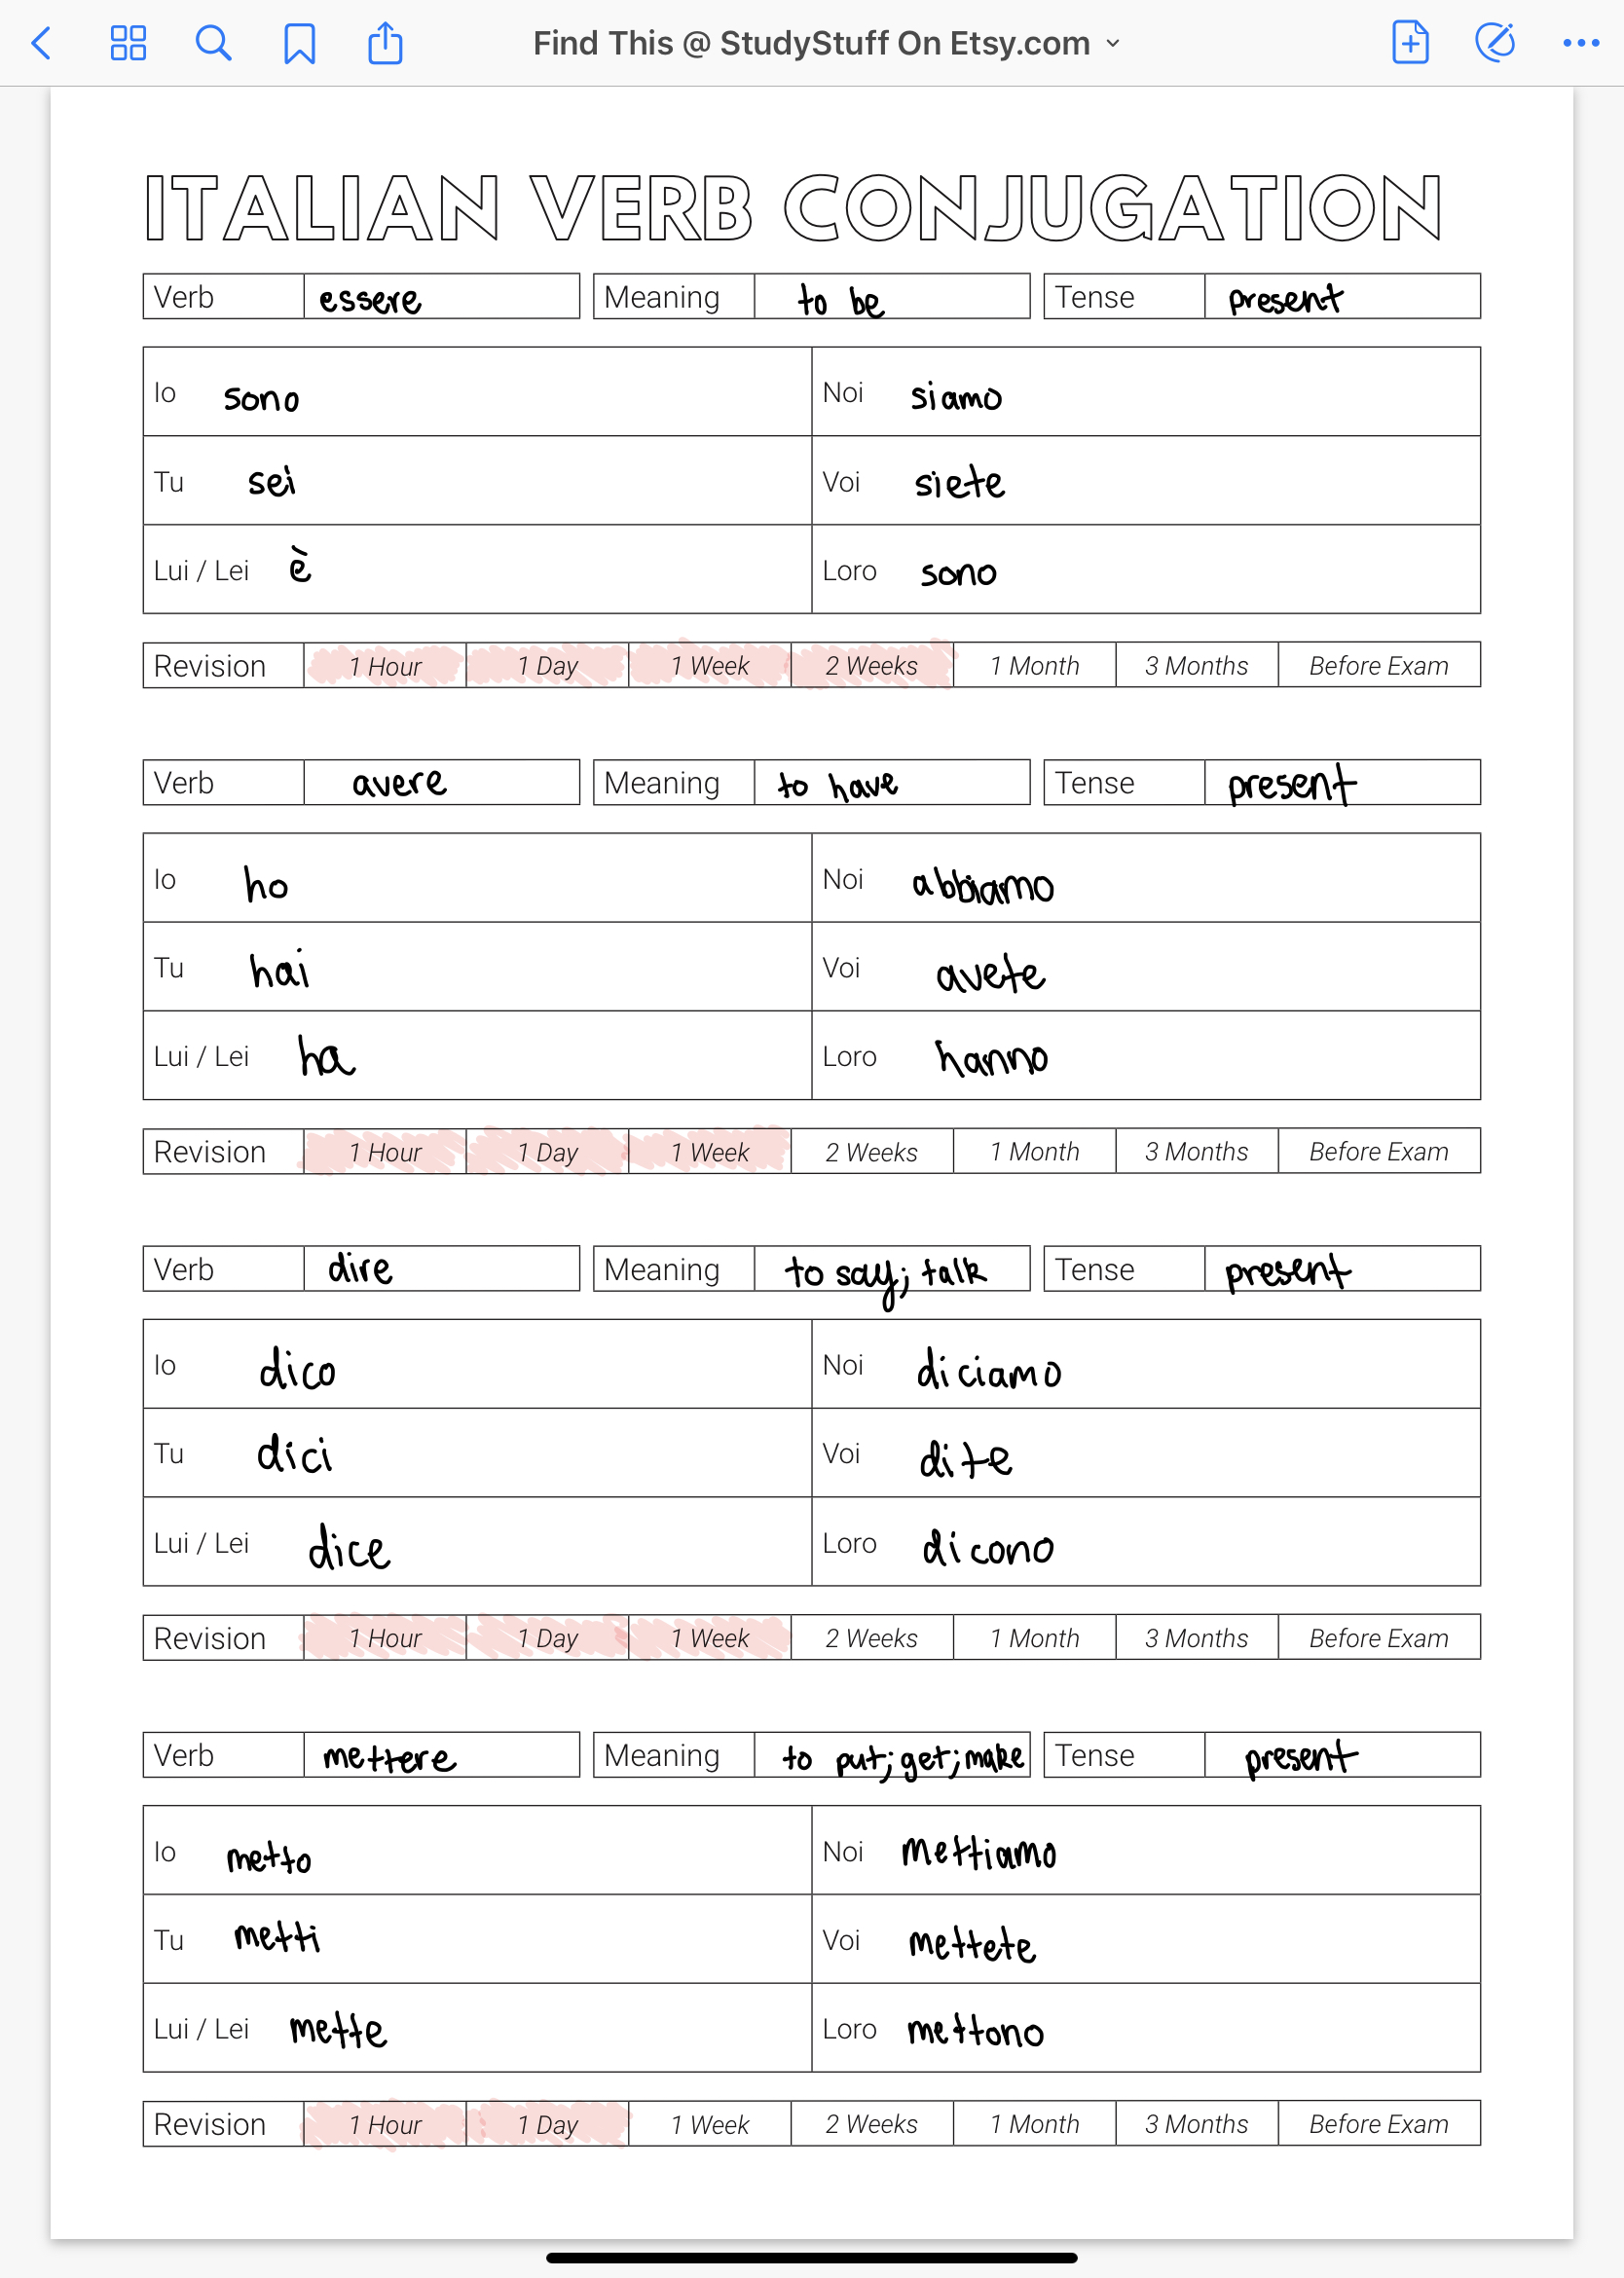 Use This Conjugation Worksheet To Master Your Italian Verbs! | Study-Stuff